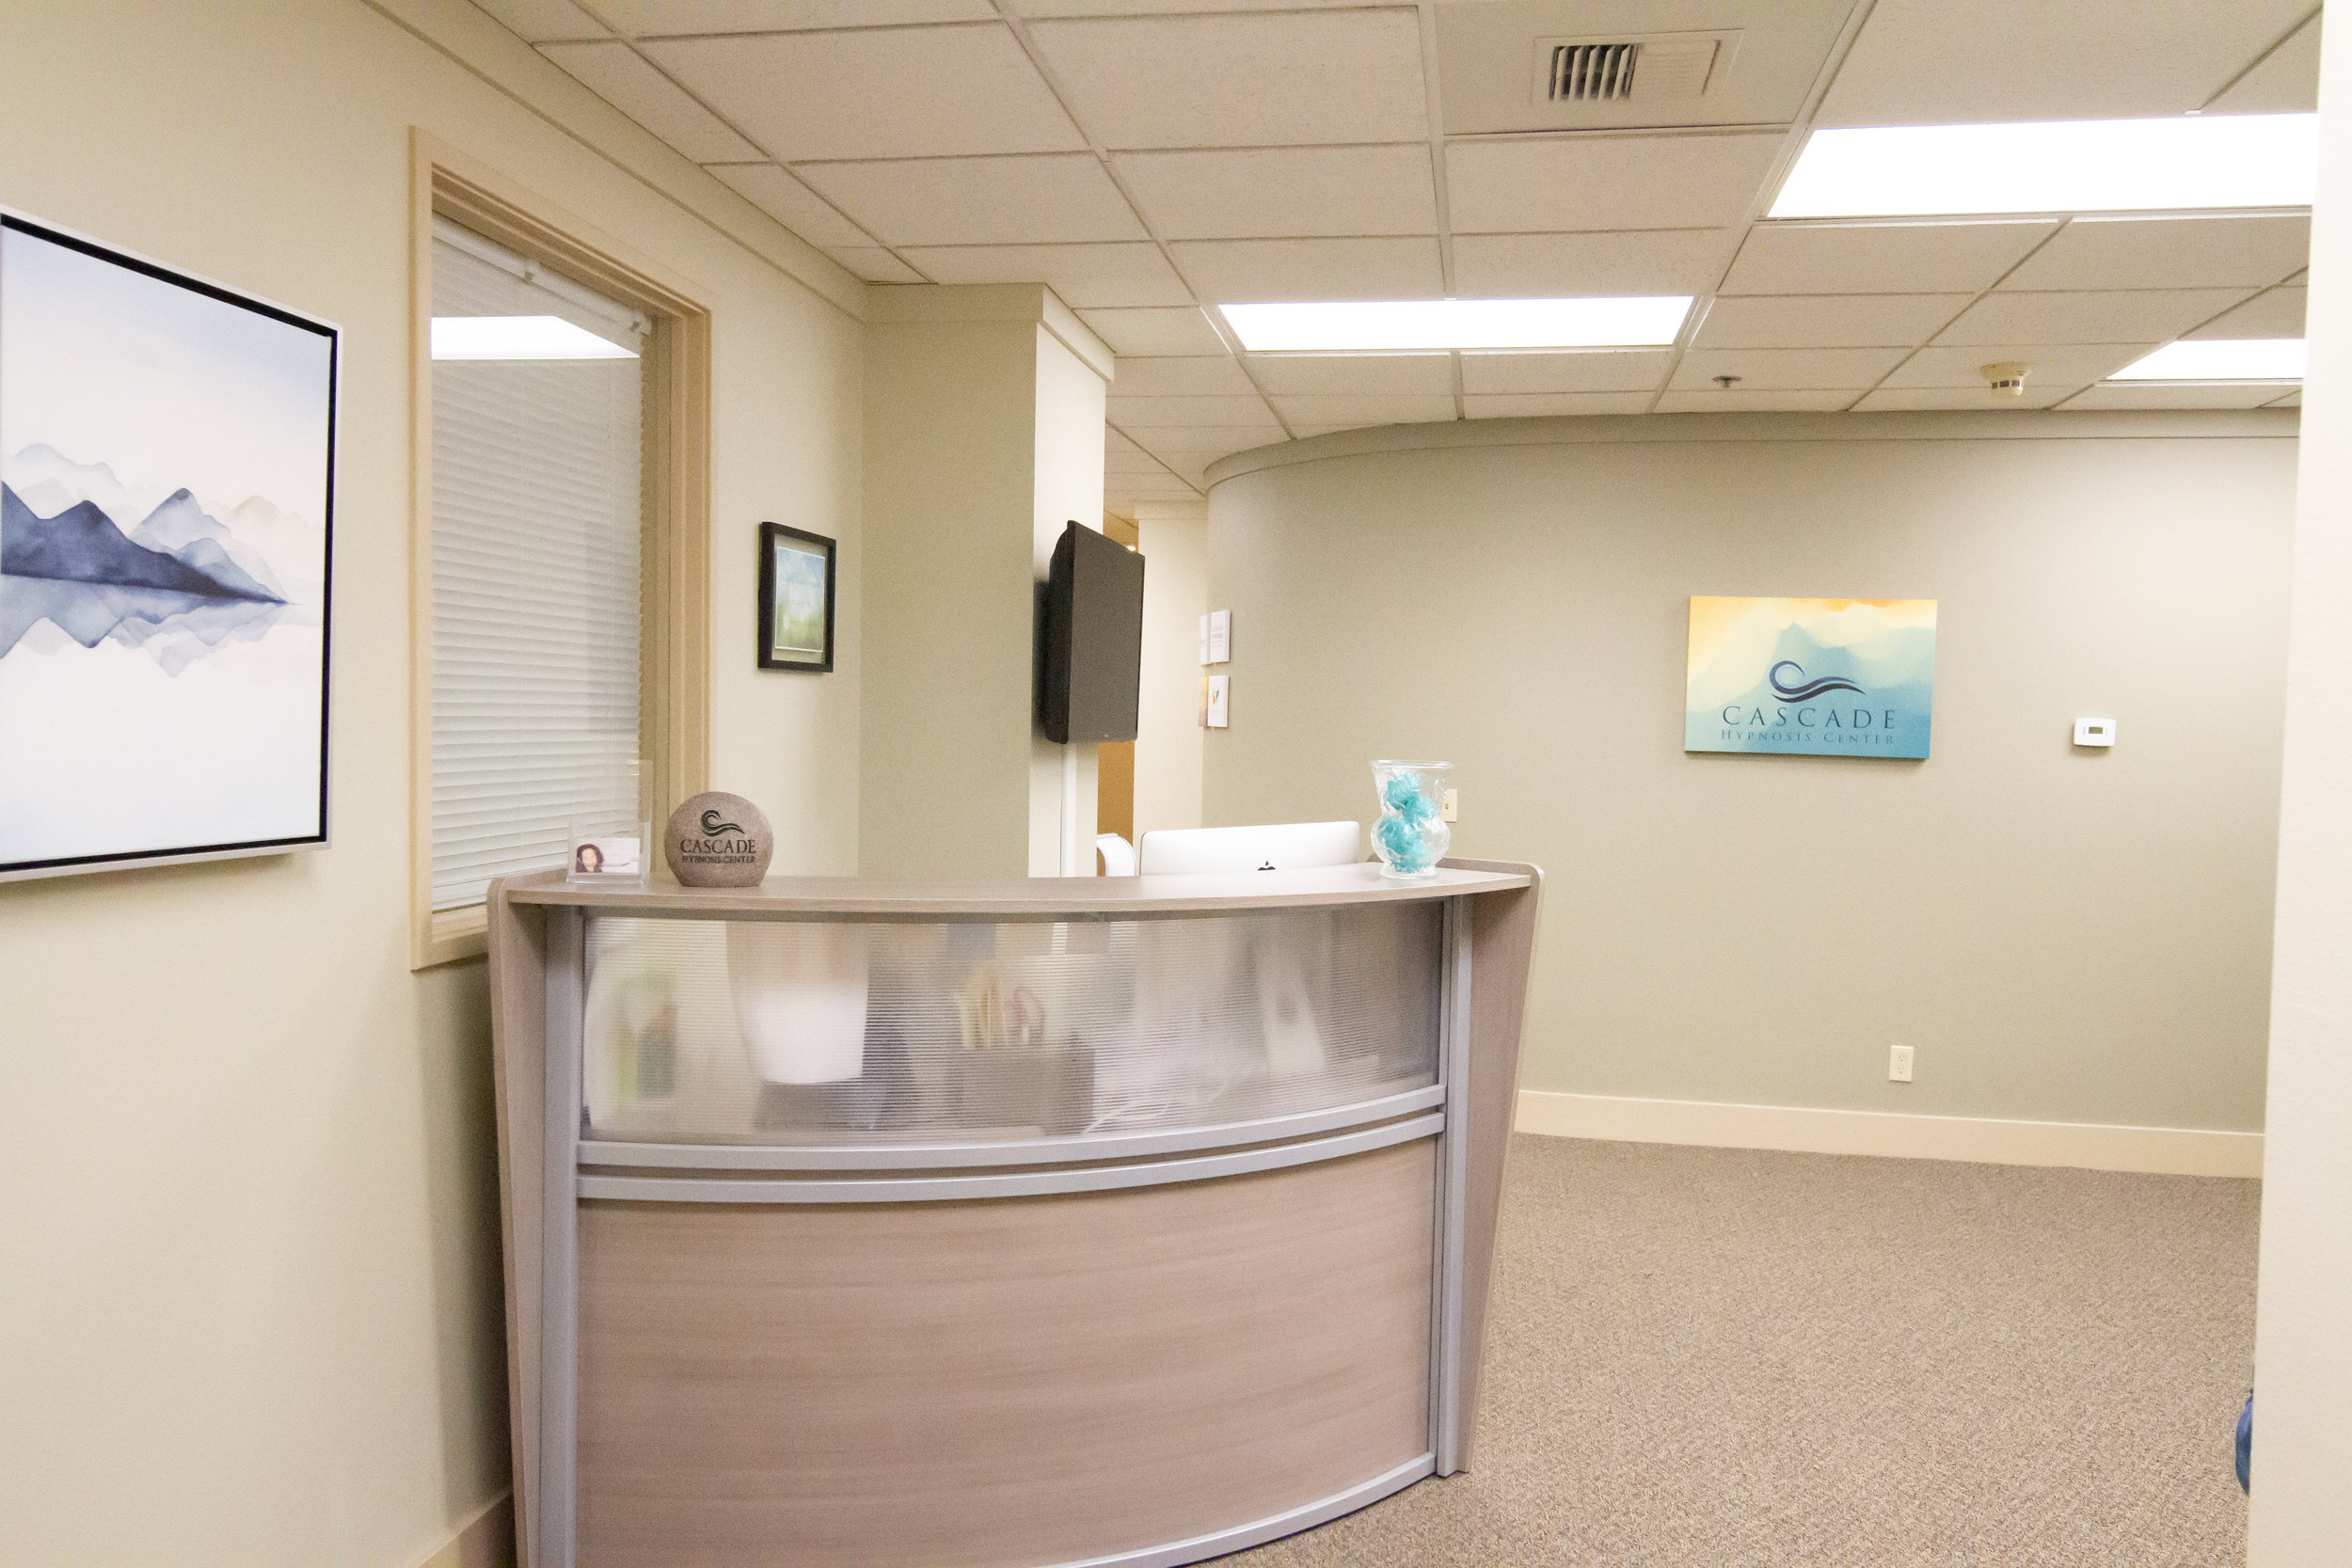 The reception desk where you will be greeted before your appointment.